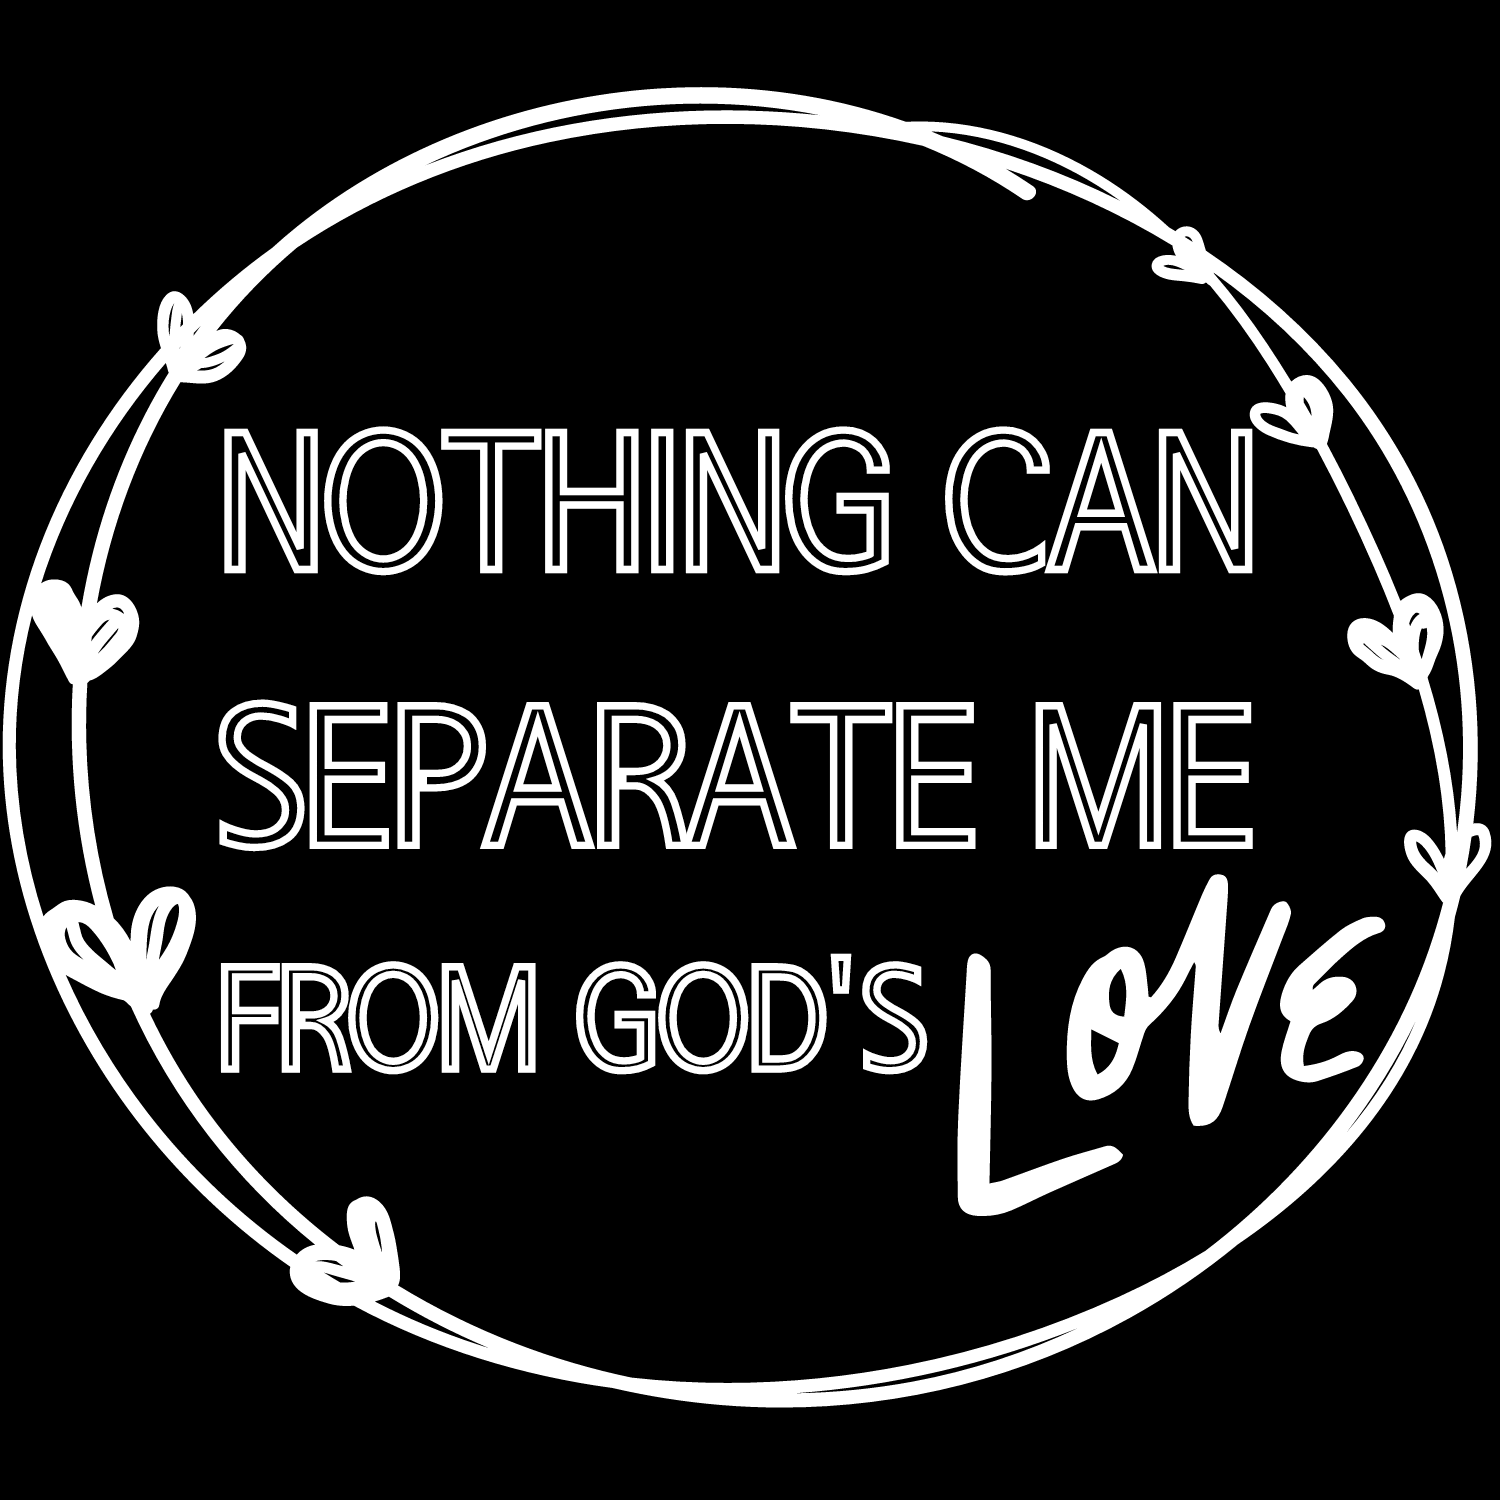 Nothing can separate me